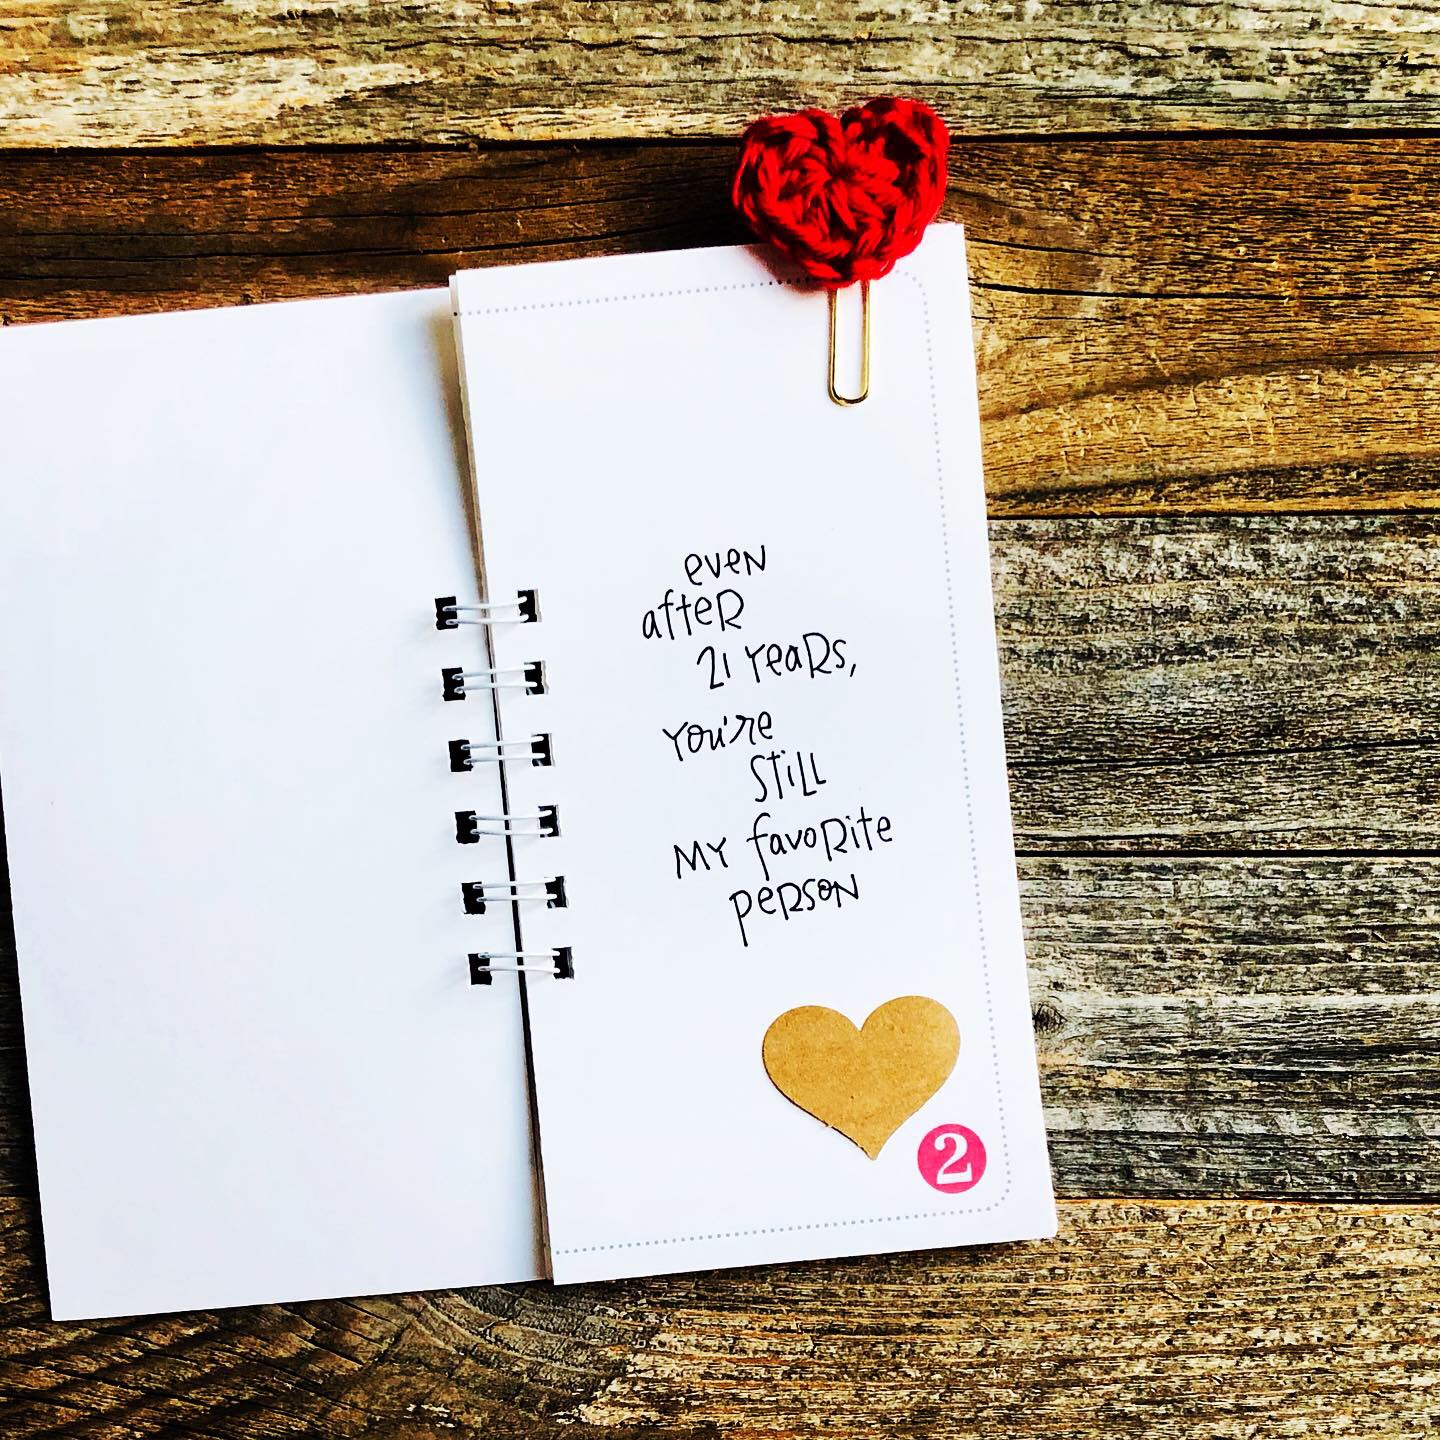 #Things I Love #Love Journal #Things I Love About You #10 Things